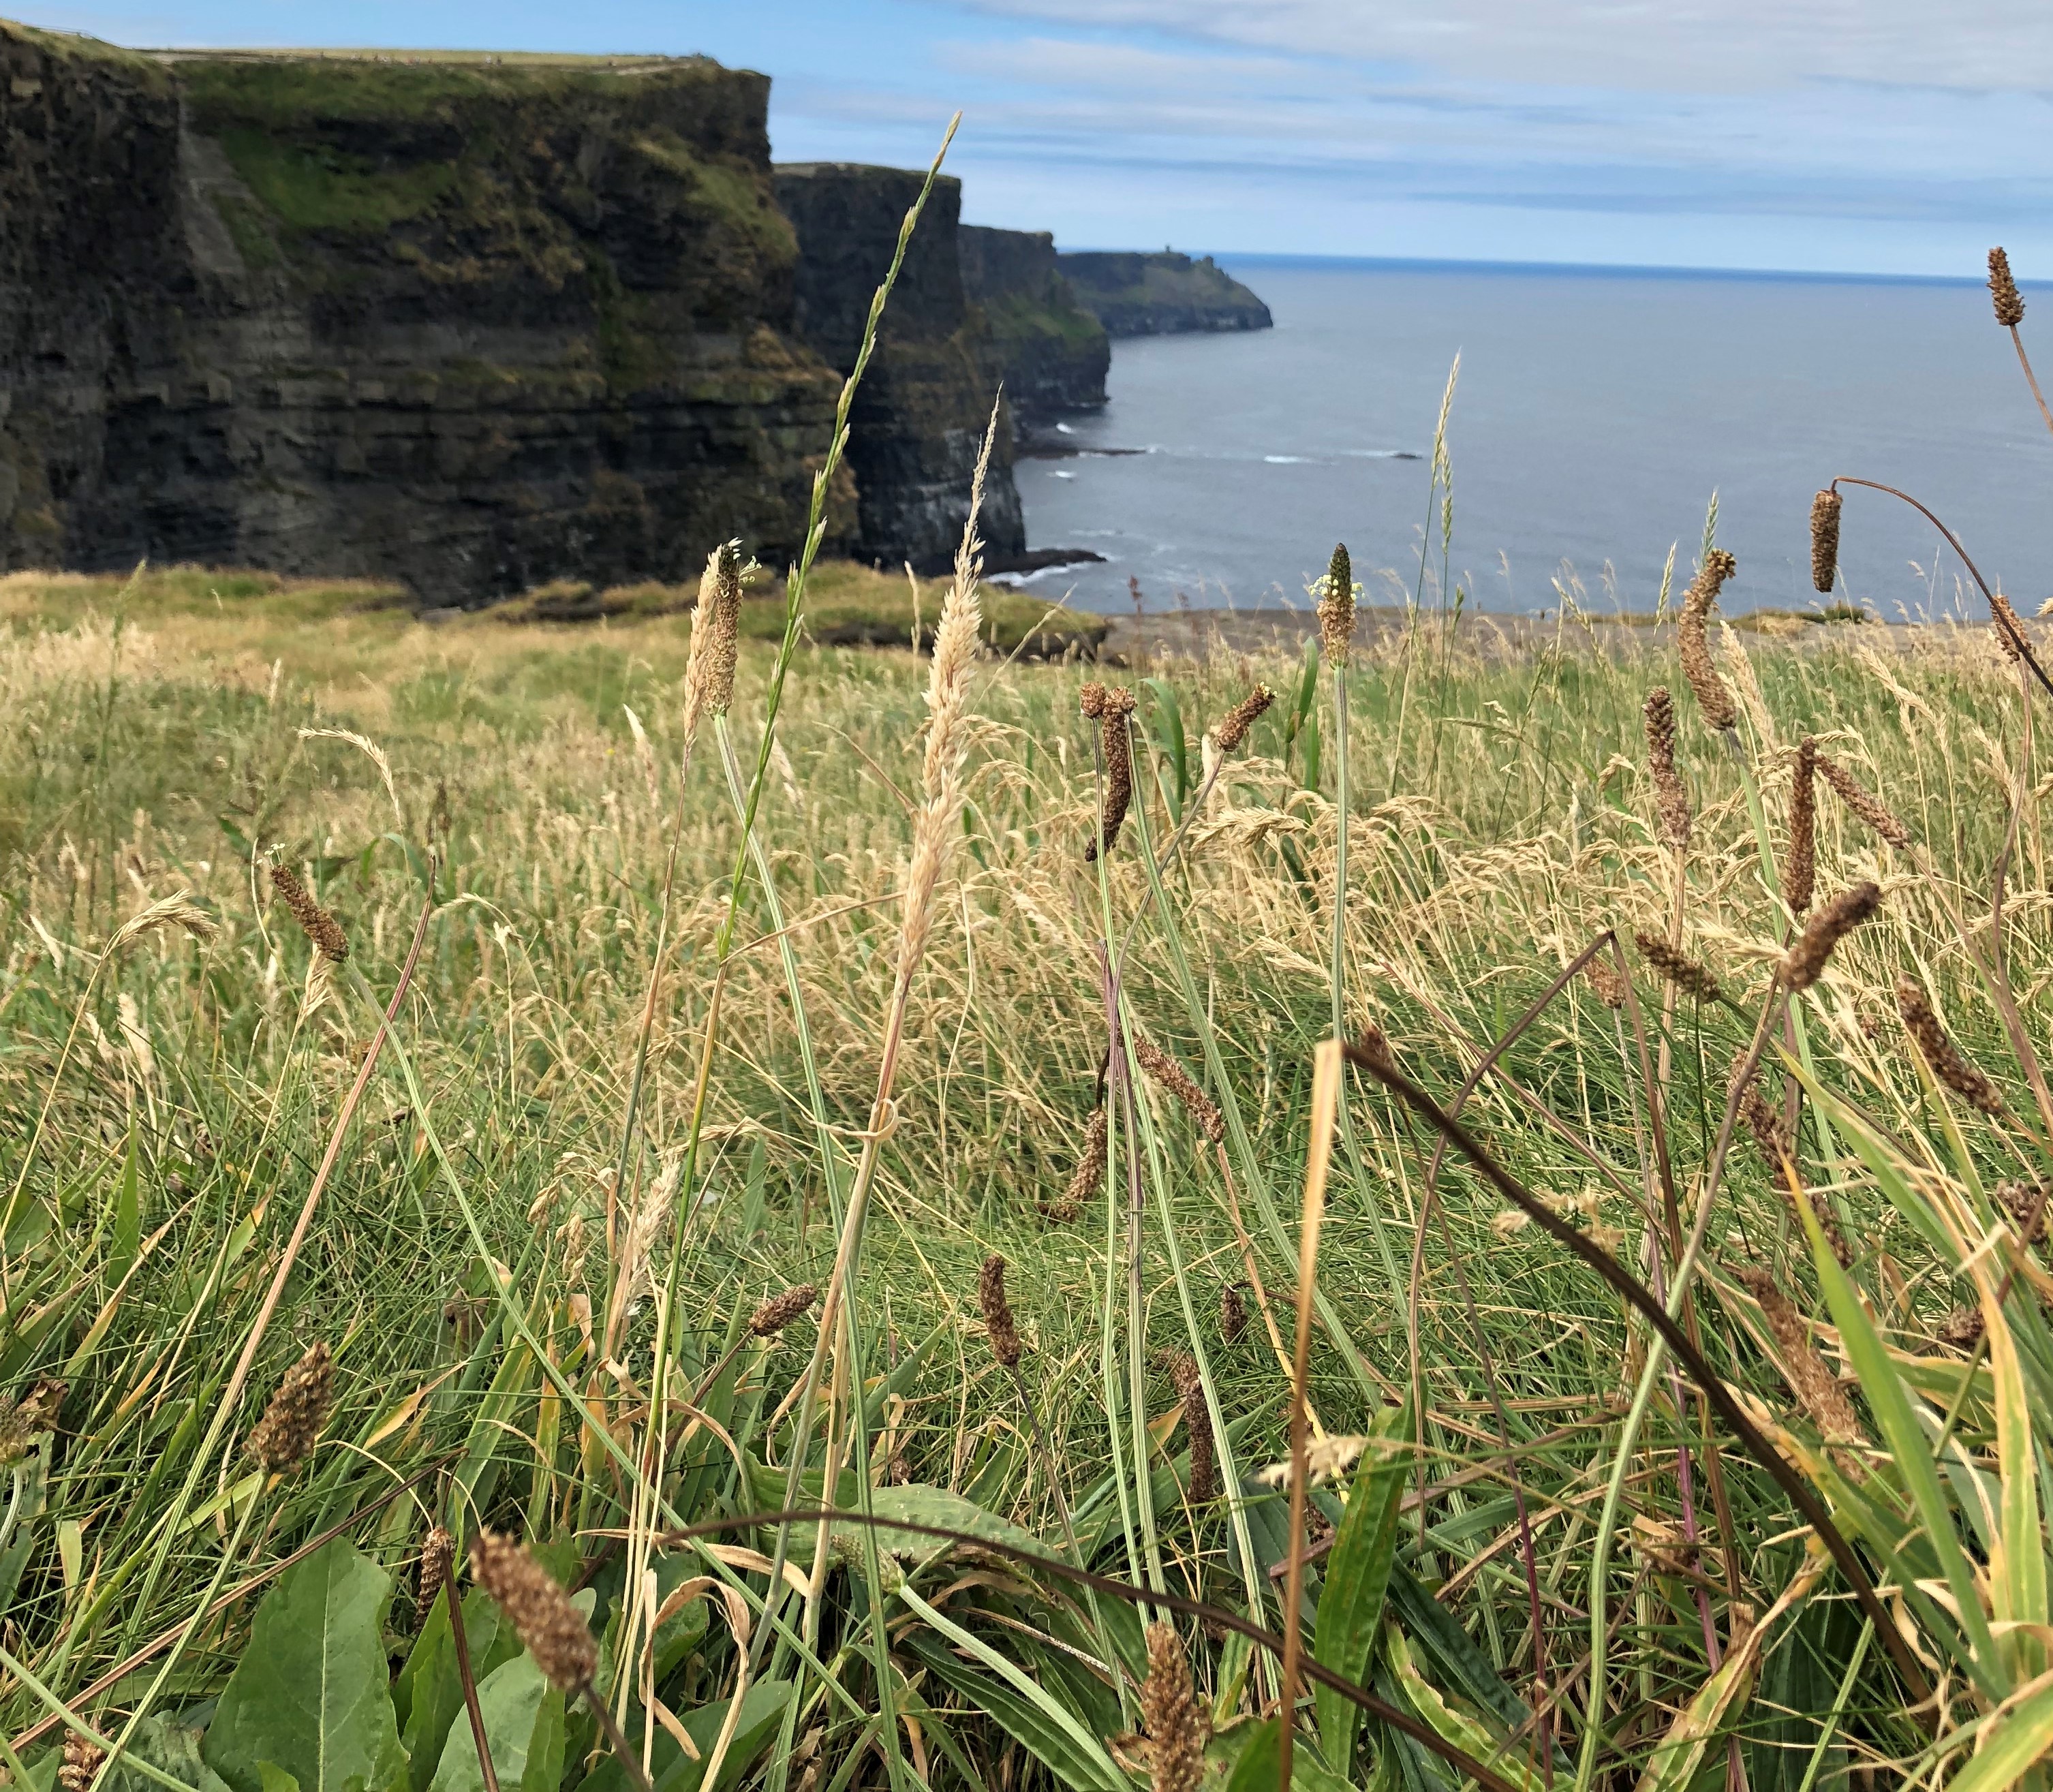 a view of the Cliffs of Moher through some weeds along the path, Galway, Ireland, June 2018